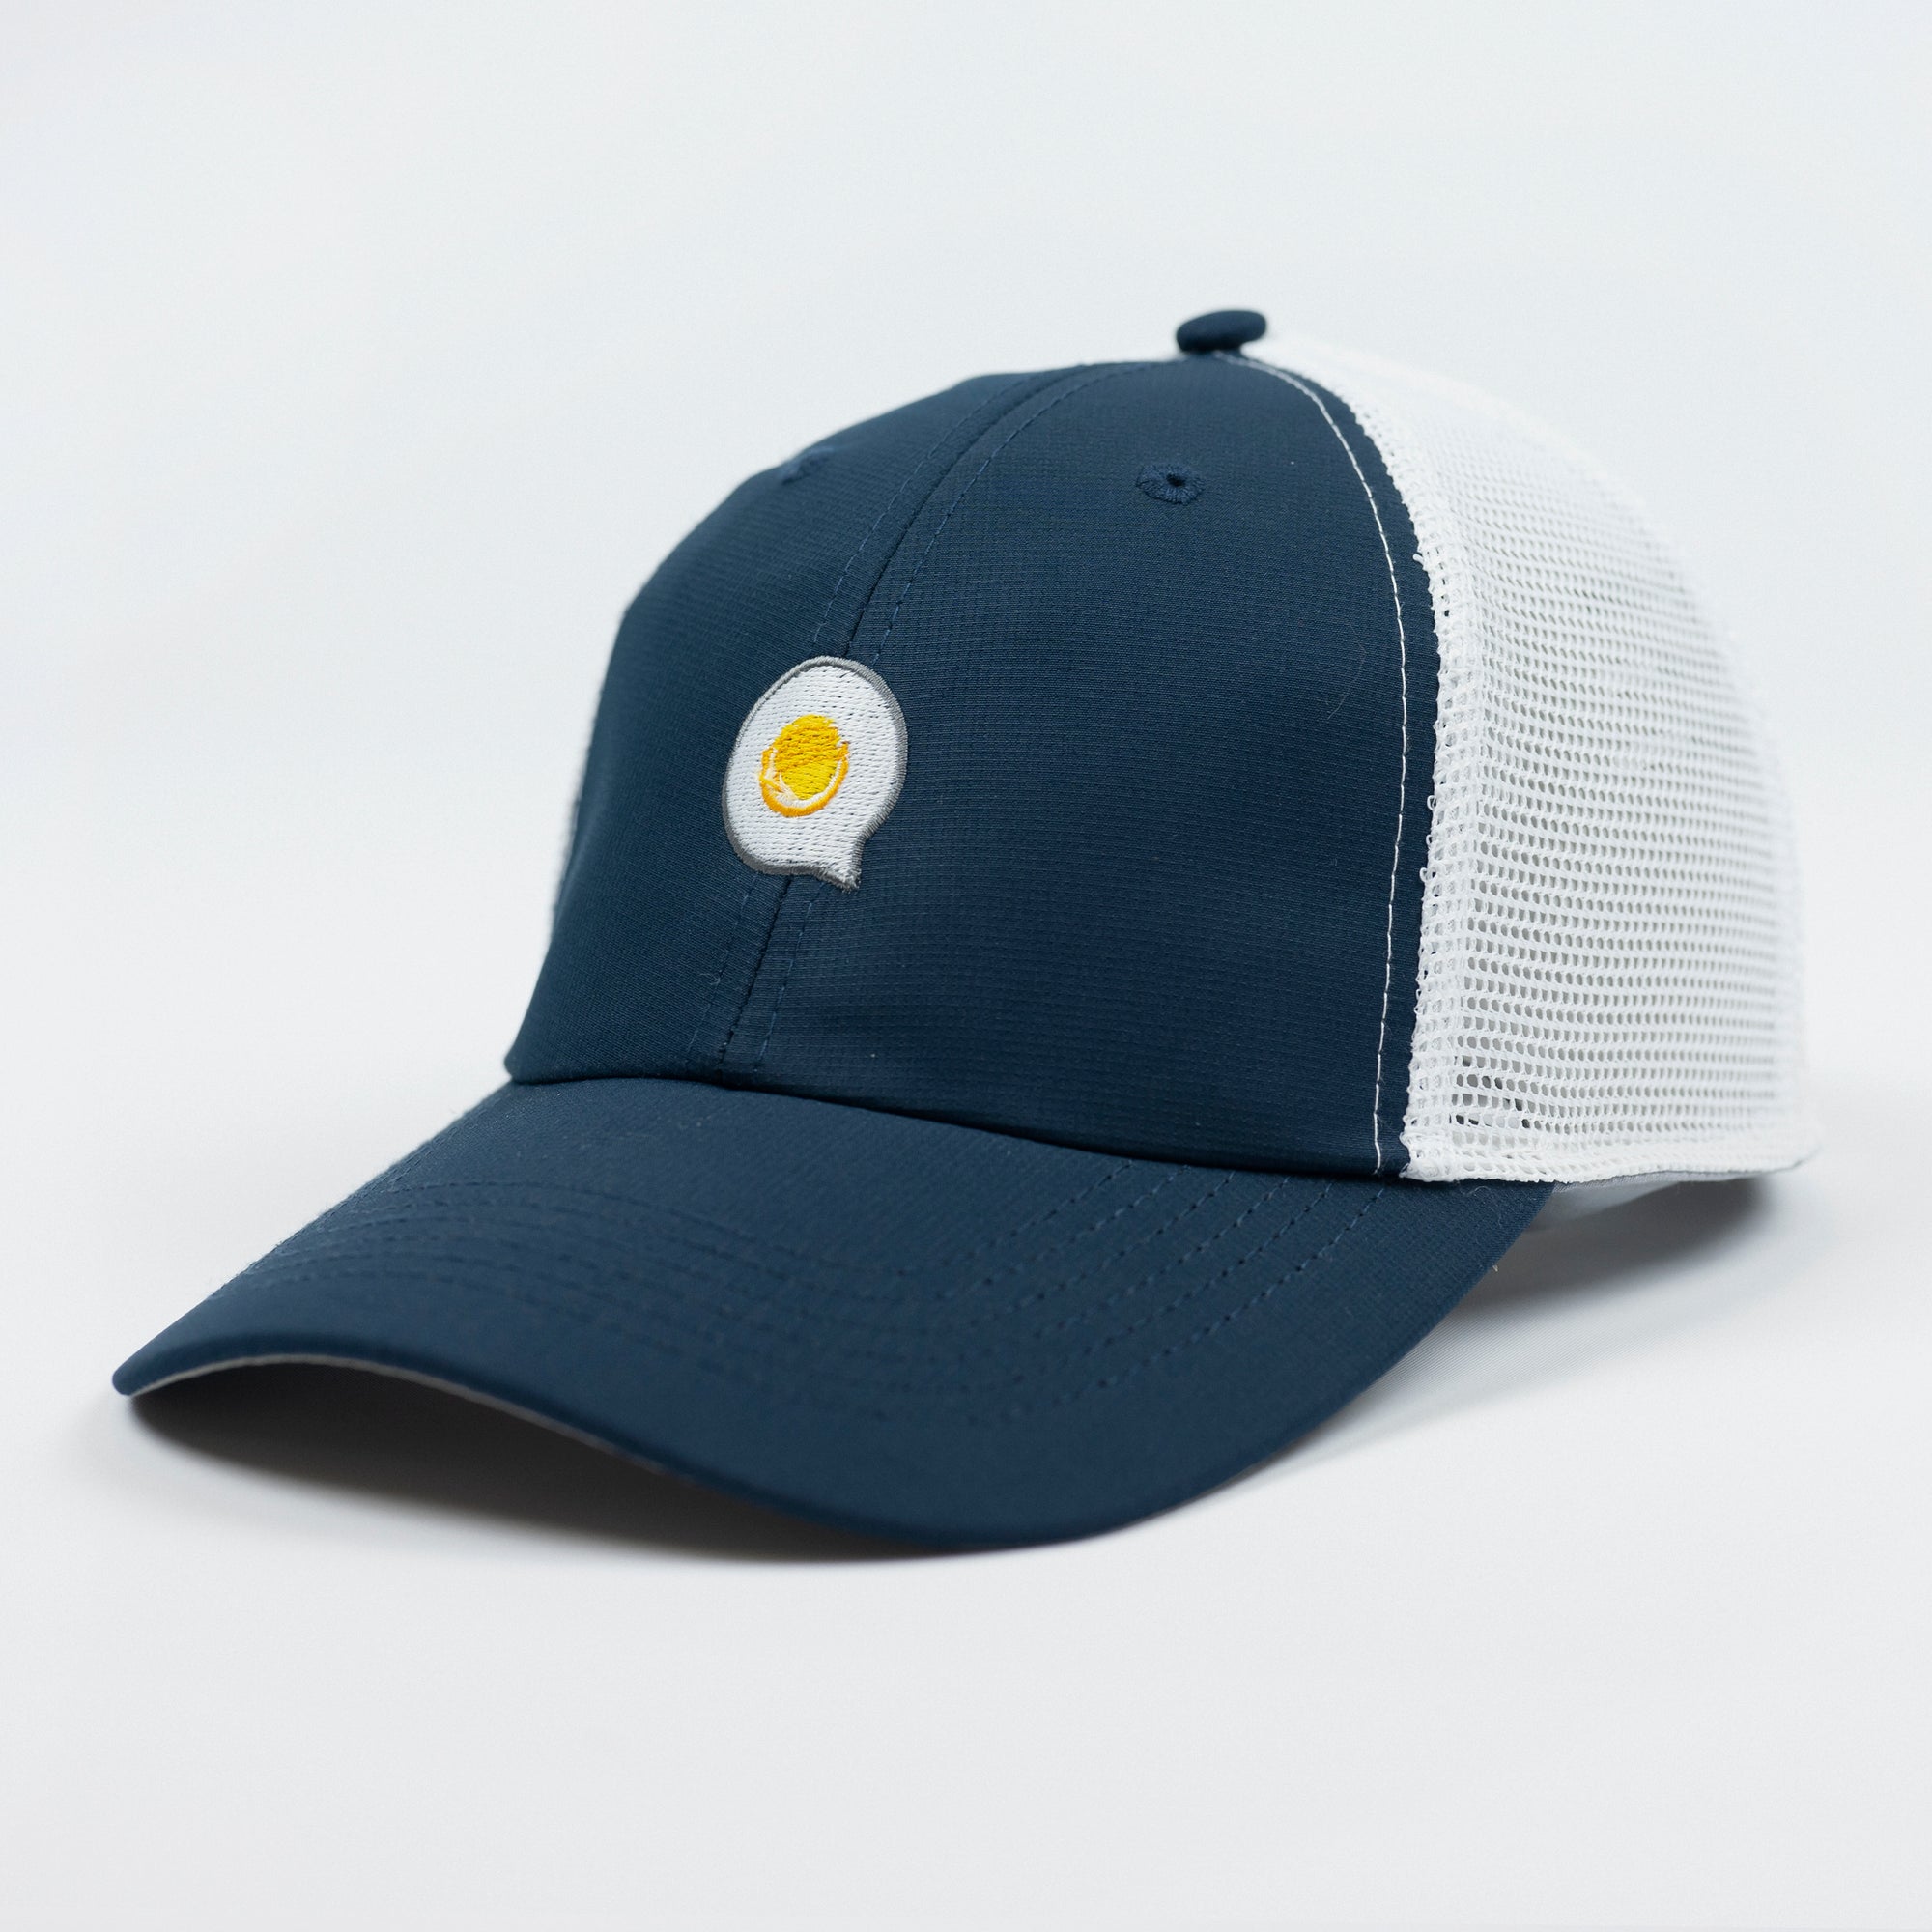 The Fried Egg & Imperial Performance Mesh Hat